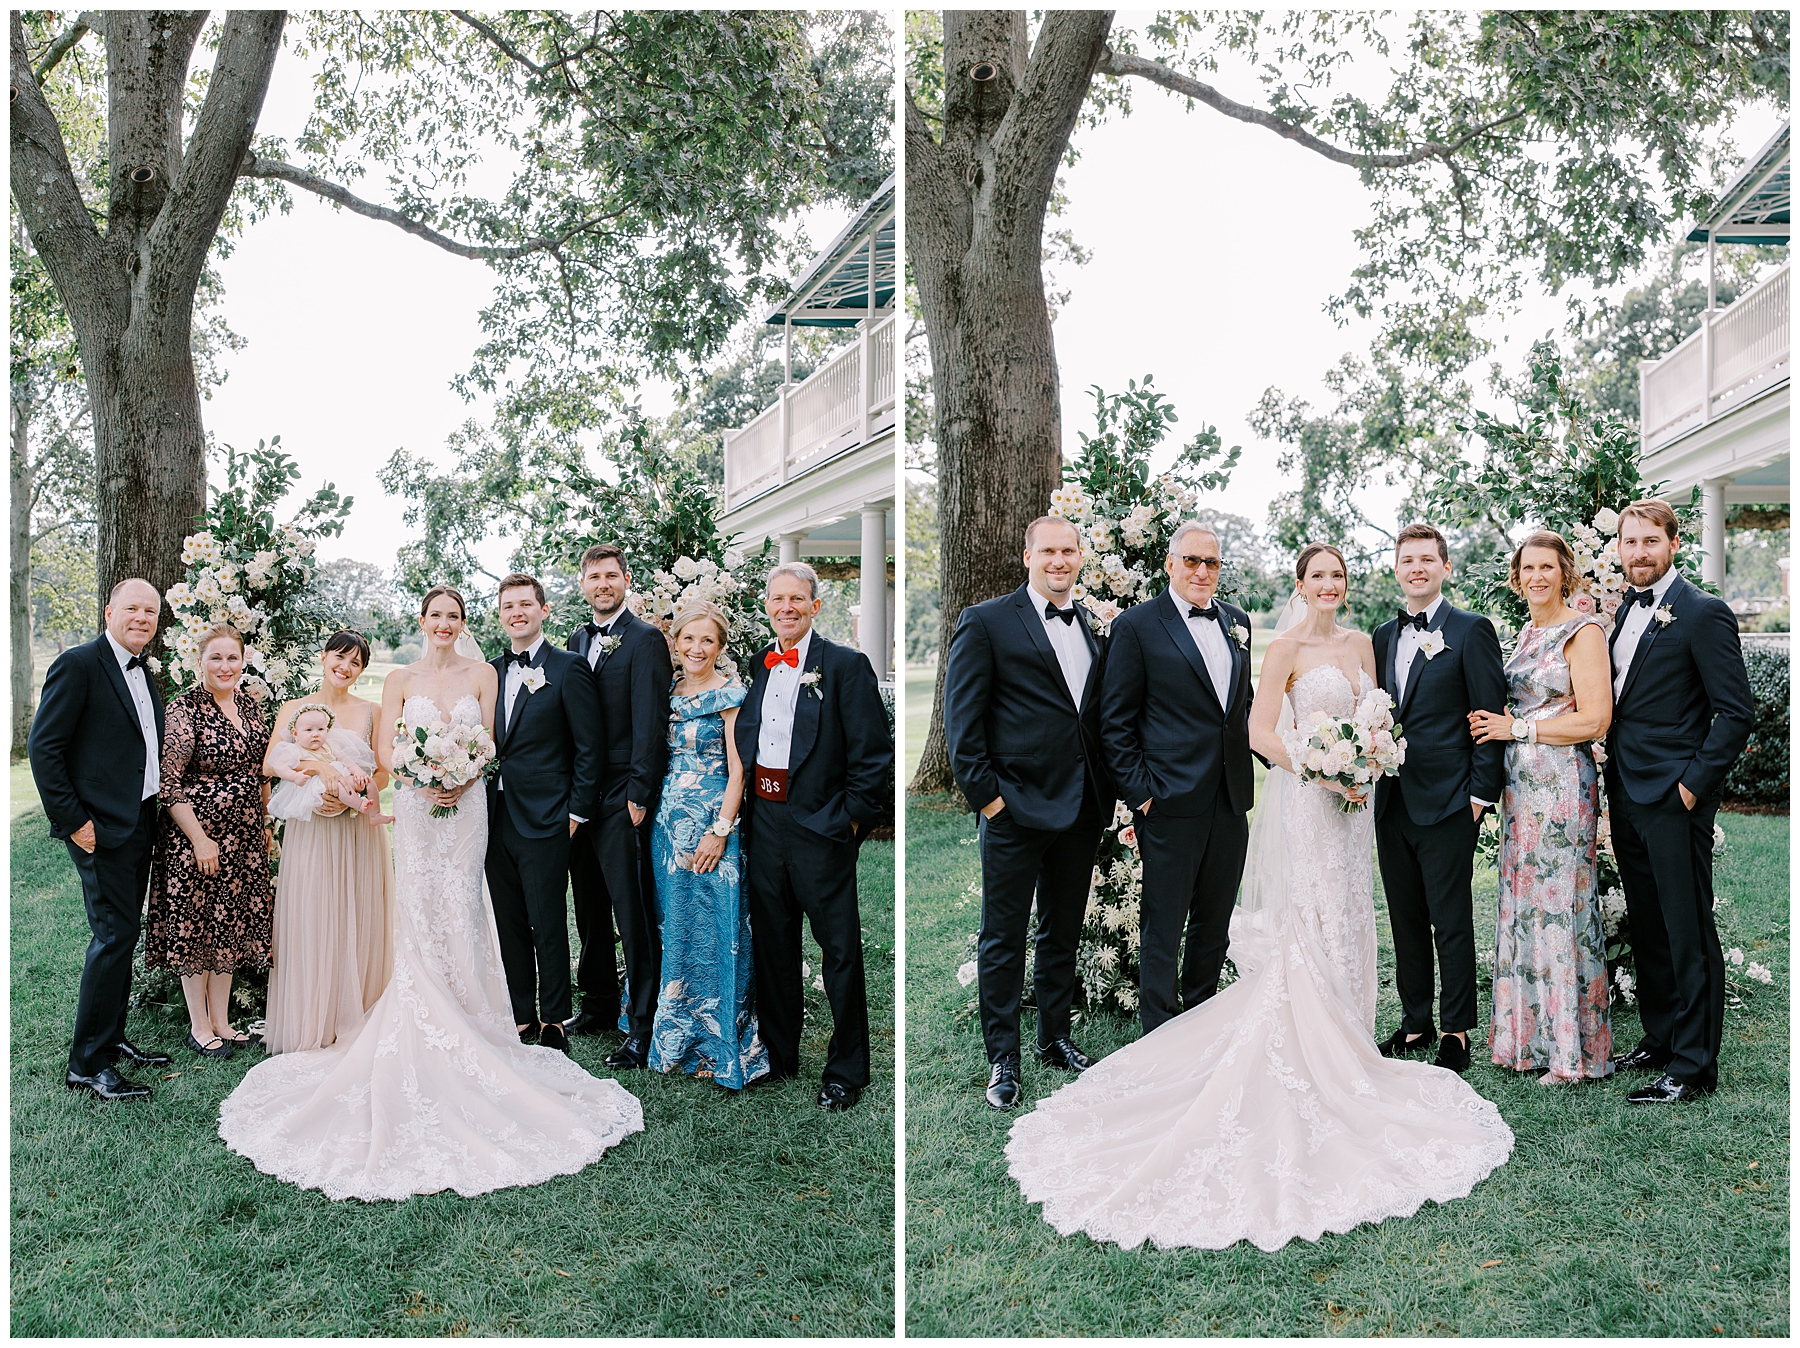 family portraits from Country Club wedding in Brookline, MA